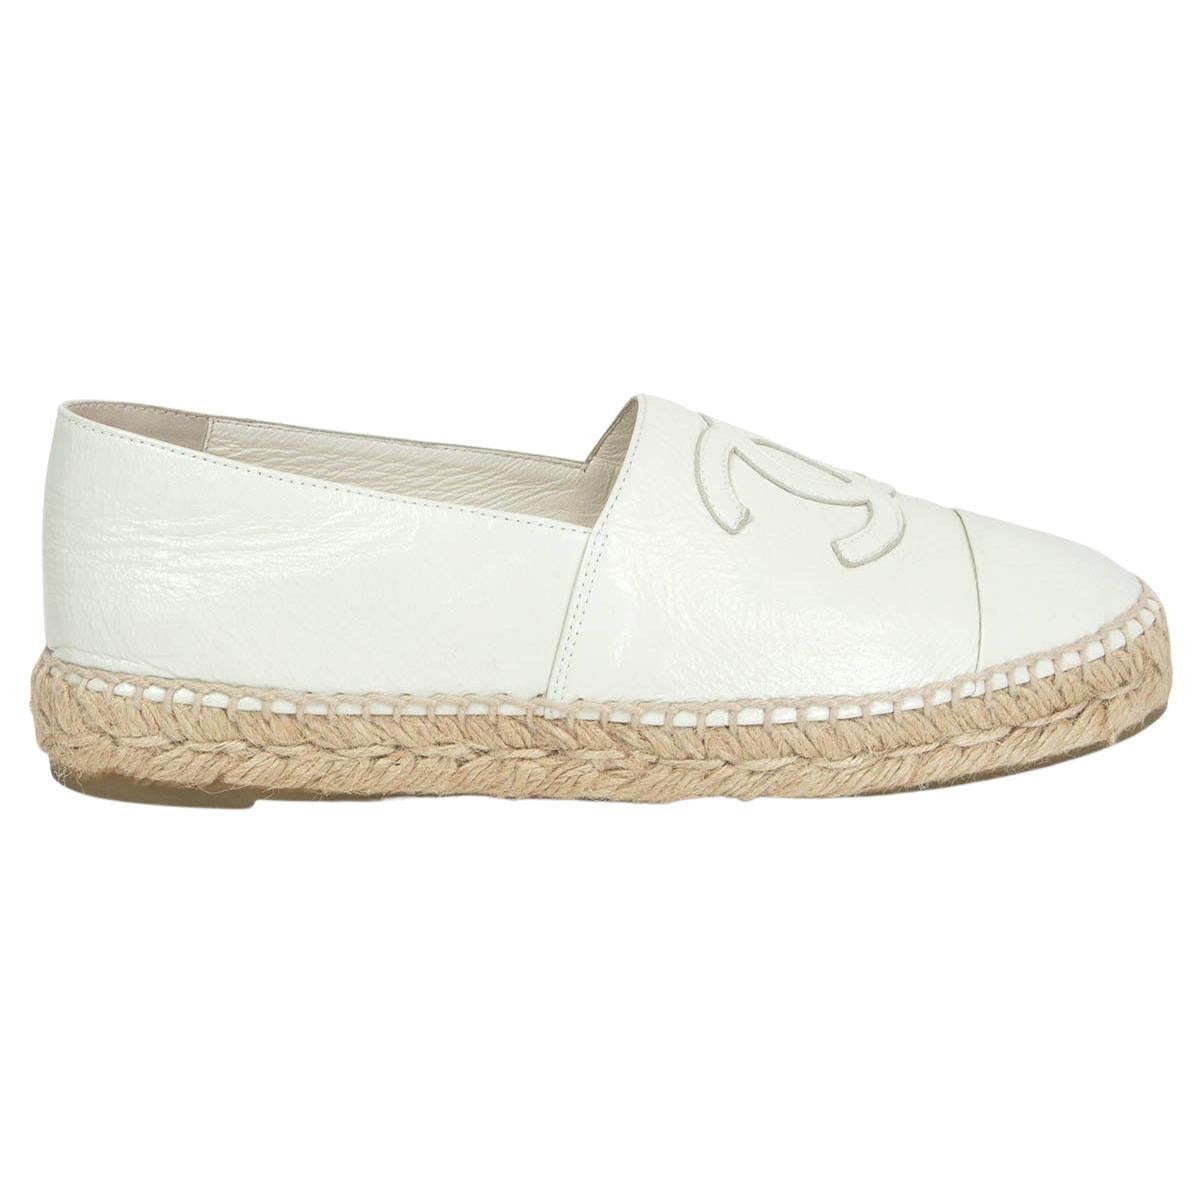 Chanel White Shoes  135 For Sale on 1stDibs  chanel white sneakers chanel  shoes white white chanel sneakers